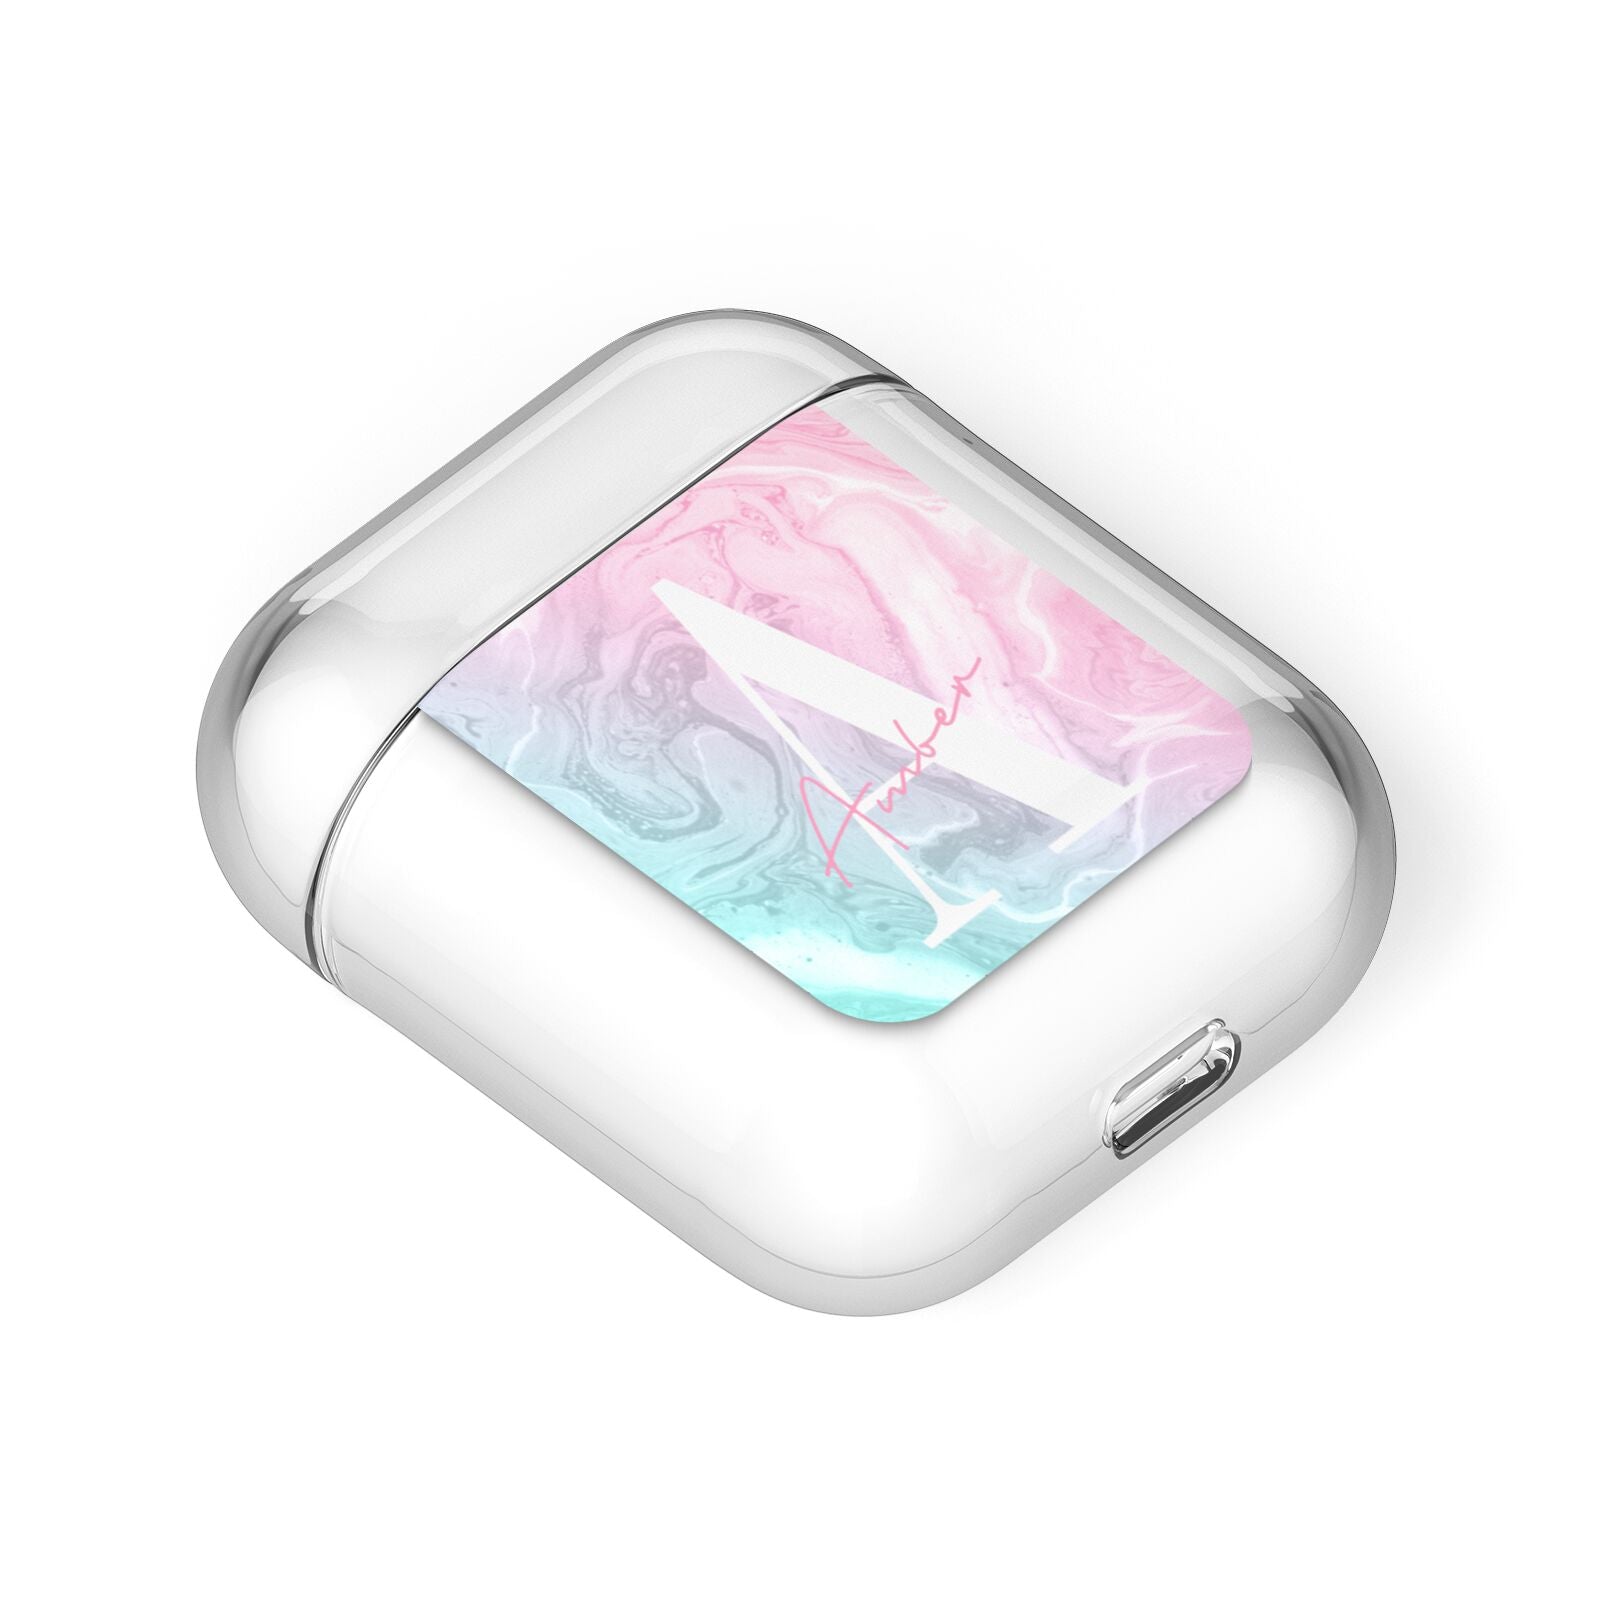 Monogrammed Pink Turquoise Pastel Marble AirPods Case Laid Flat